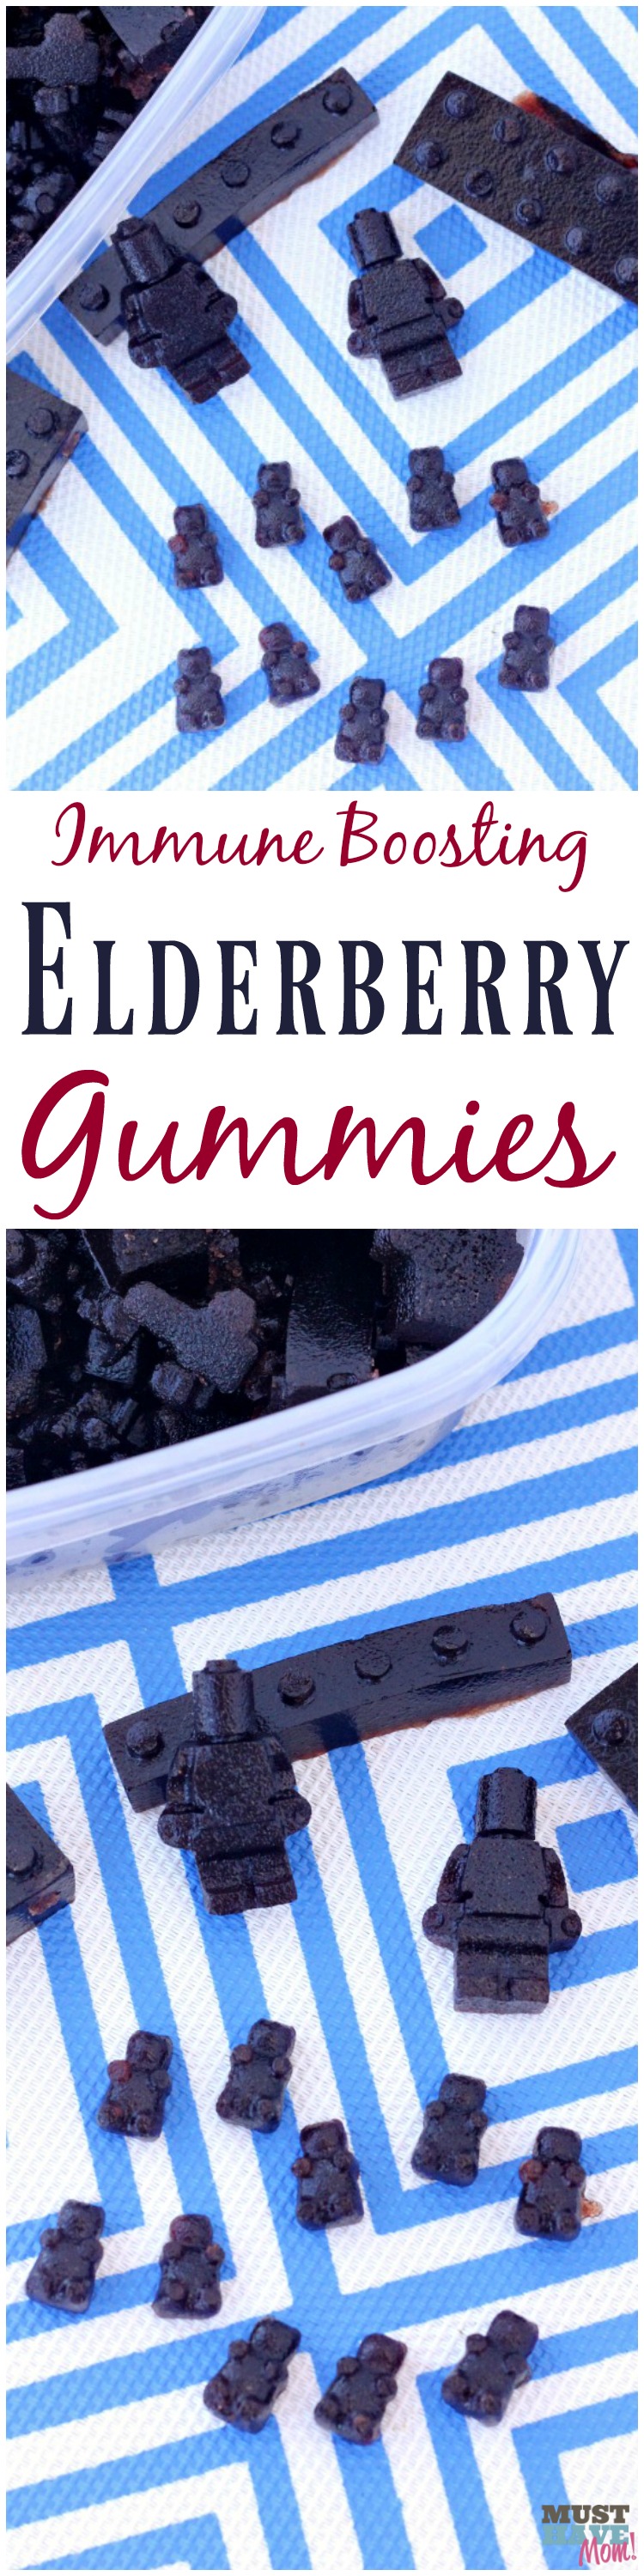 Immune boosting elderberry gummies recipe! Great for kids and adults. Take daily to prevent cold and flu and also to shorten the duration of the flu or a cold!